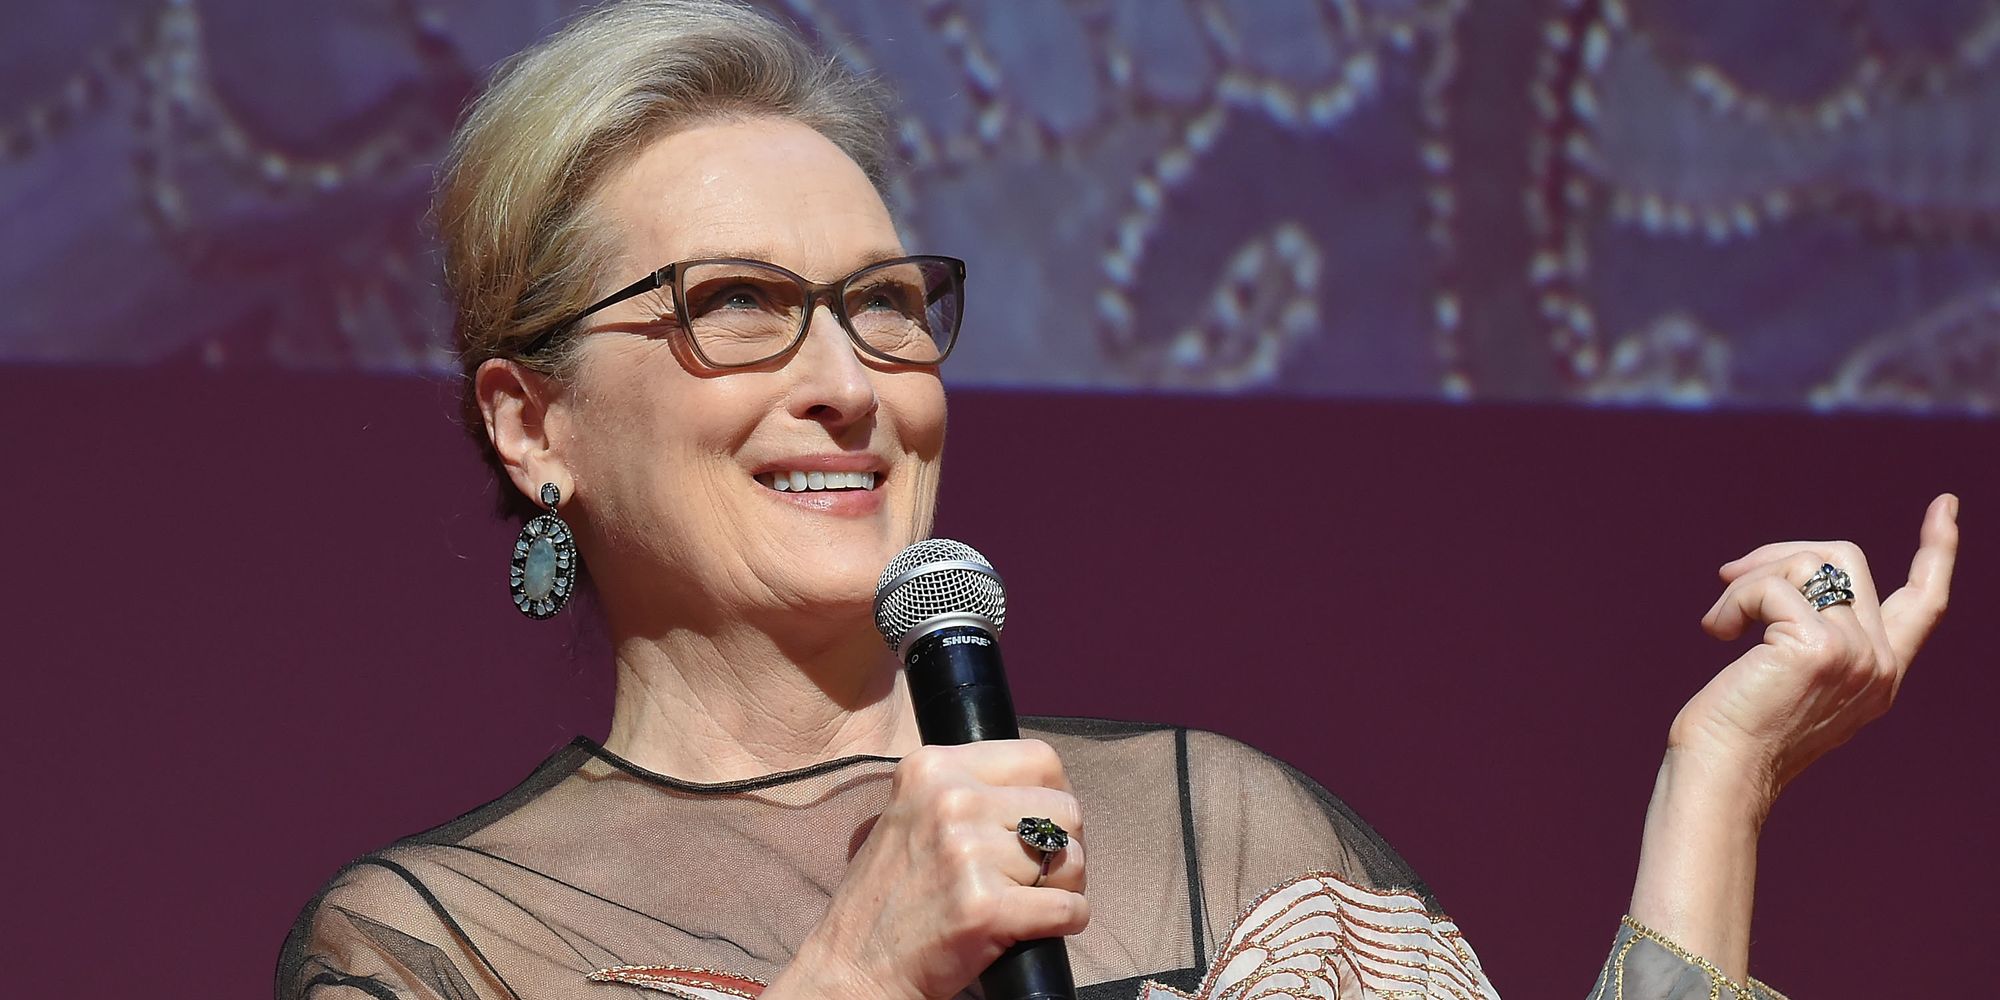 Watch Meryl Streep Sing Hilariously Horribly In Deleted Scene - Huffington Post